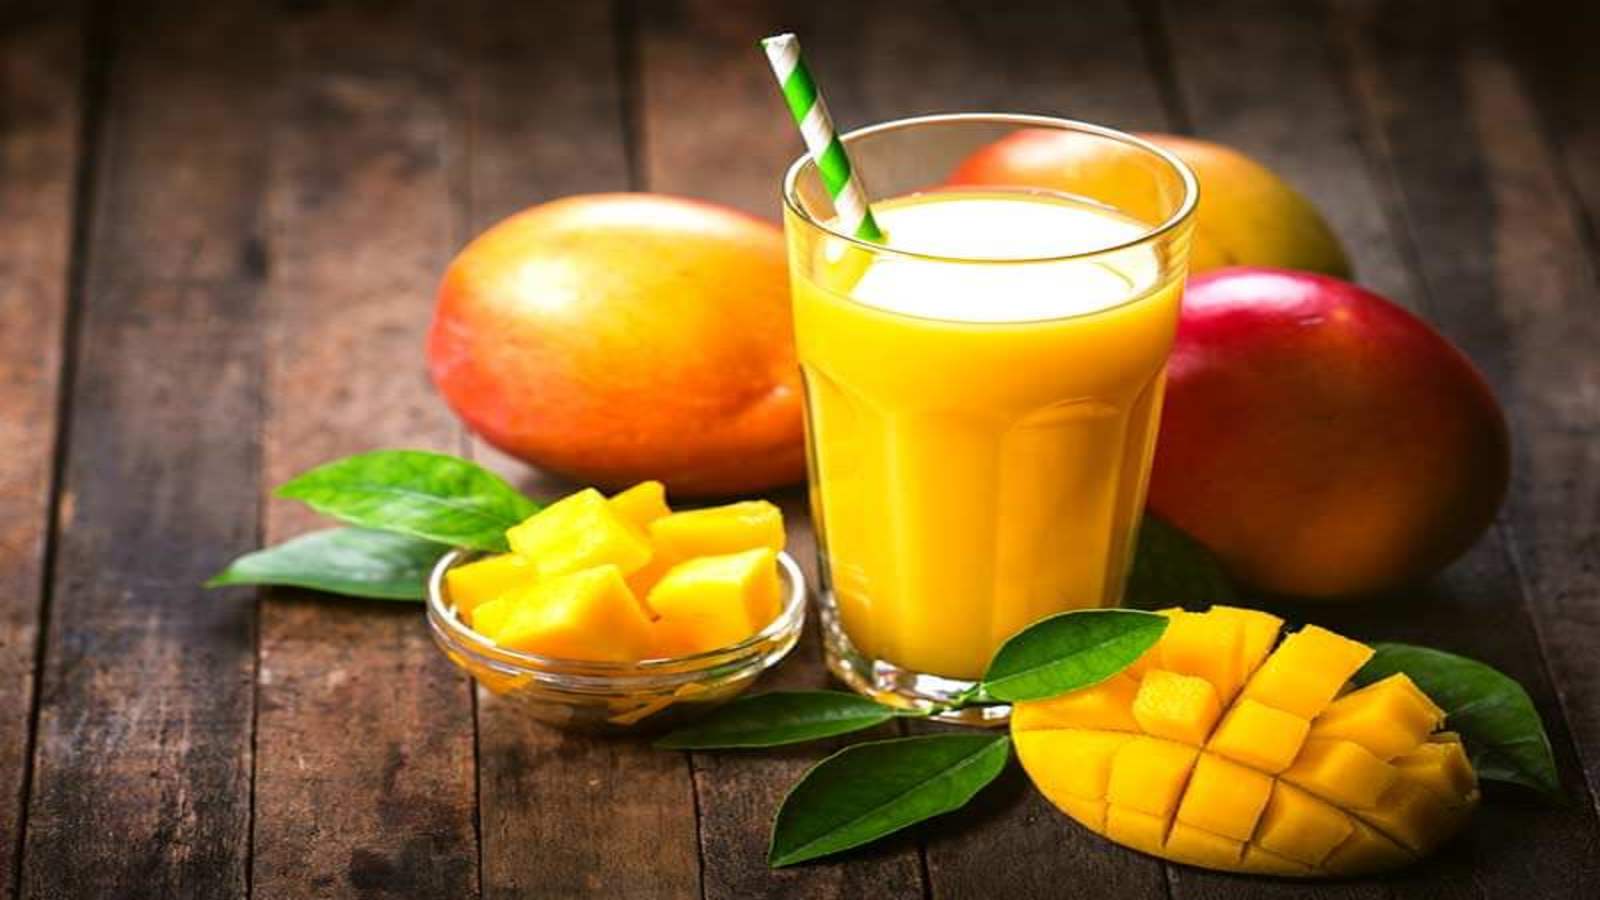 Mango consumption can help manage key risk factors that contribute to chronic disease, study finds 